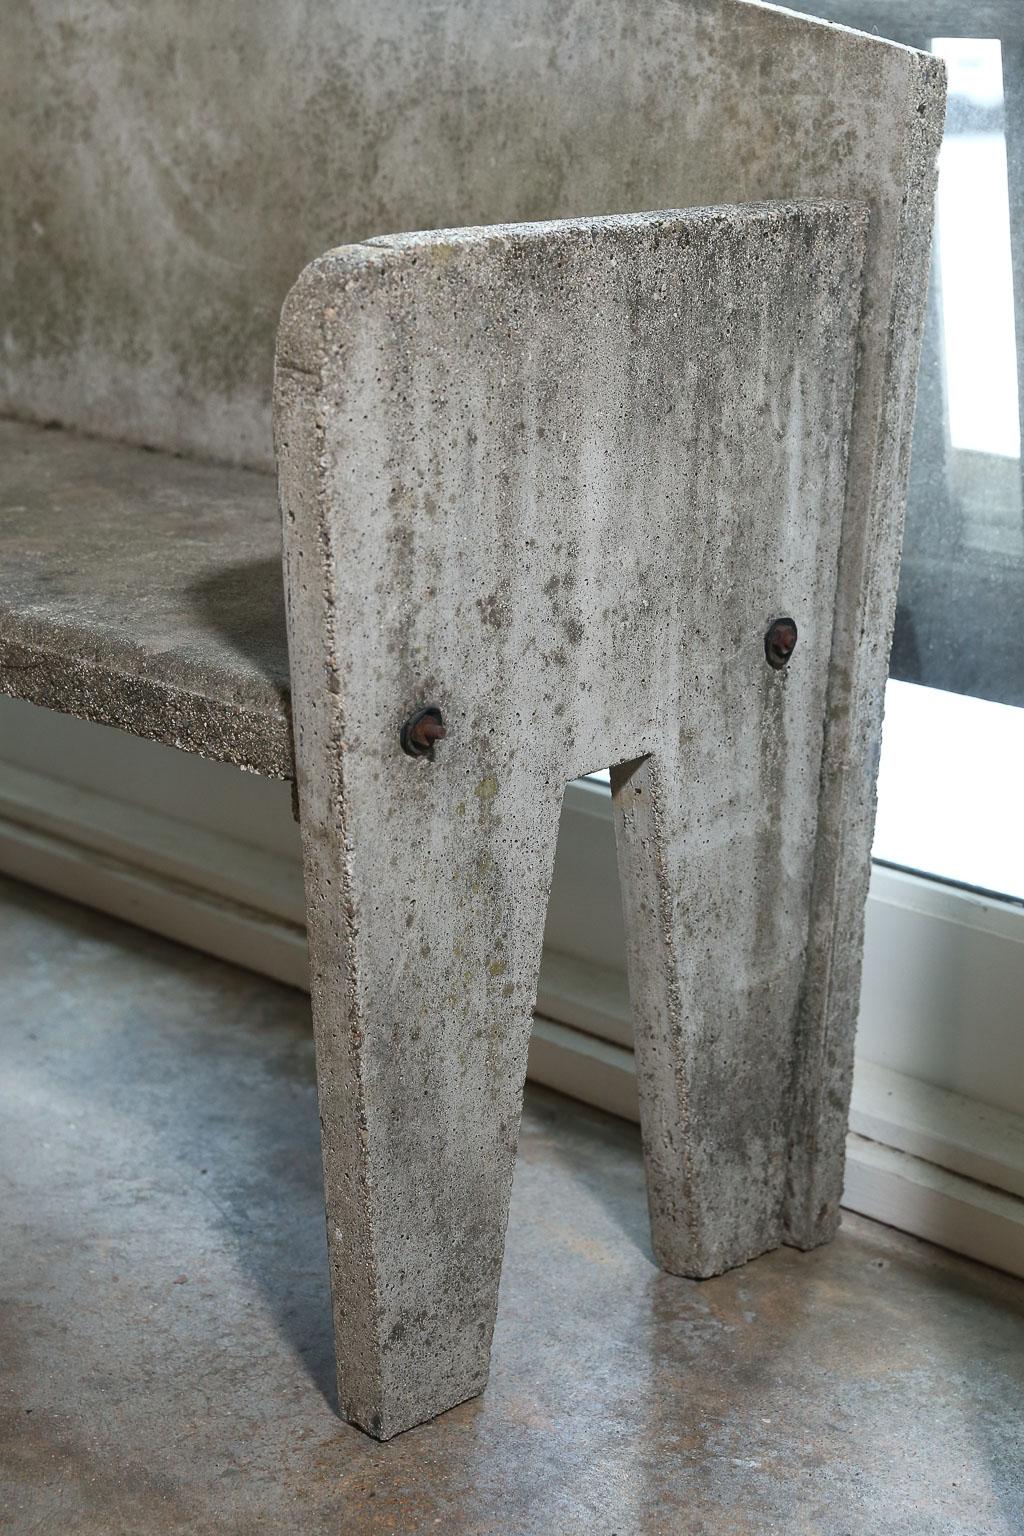 This concrete garden bench, found in Southern France, is perfect for a small patio or garden area. The clean lines make it suitable for any type of outdoor decor. It's unusual, almost midcentury lines, make it one of a kind.